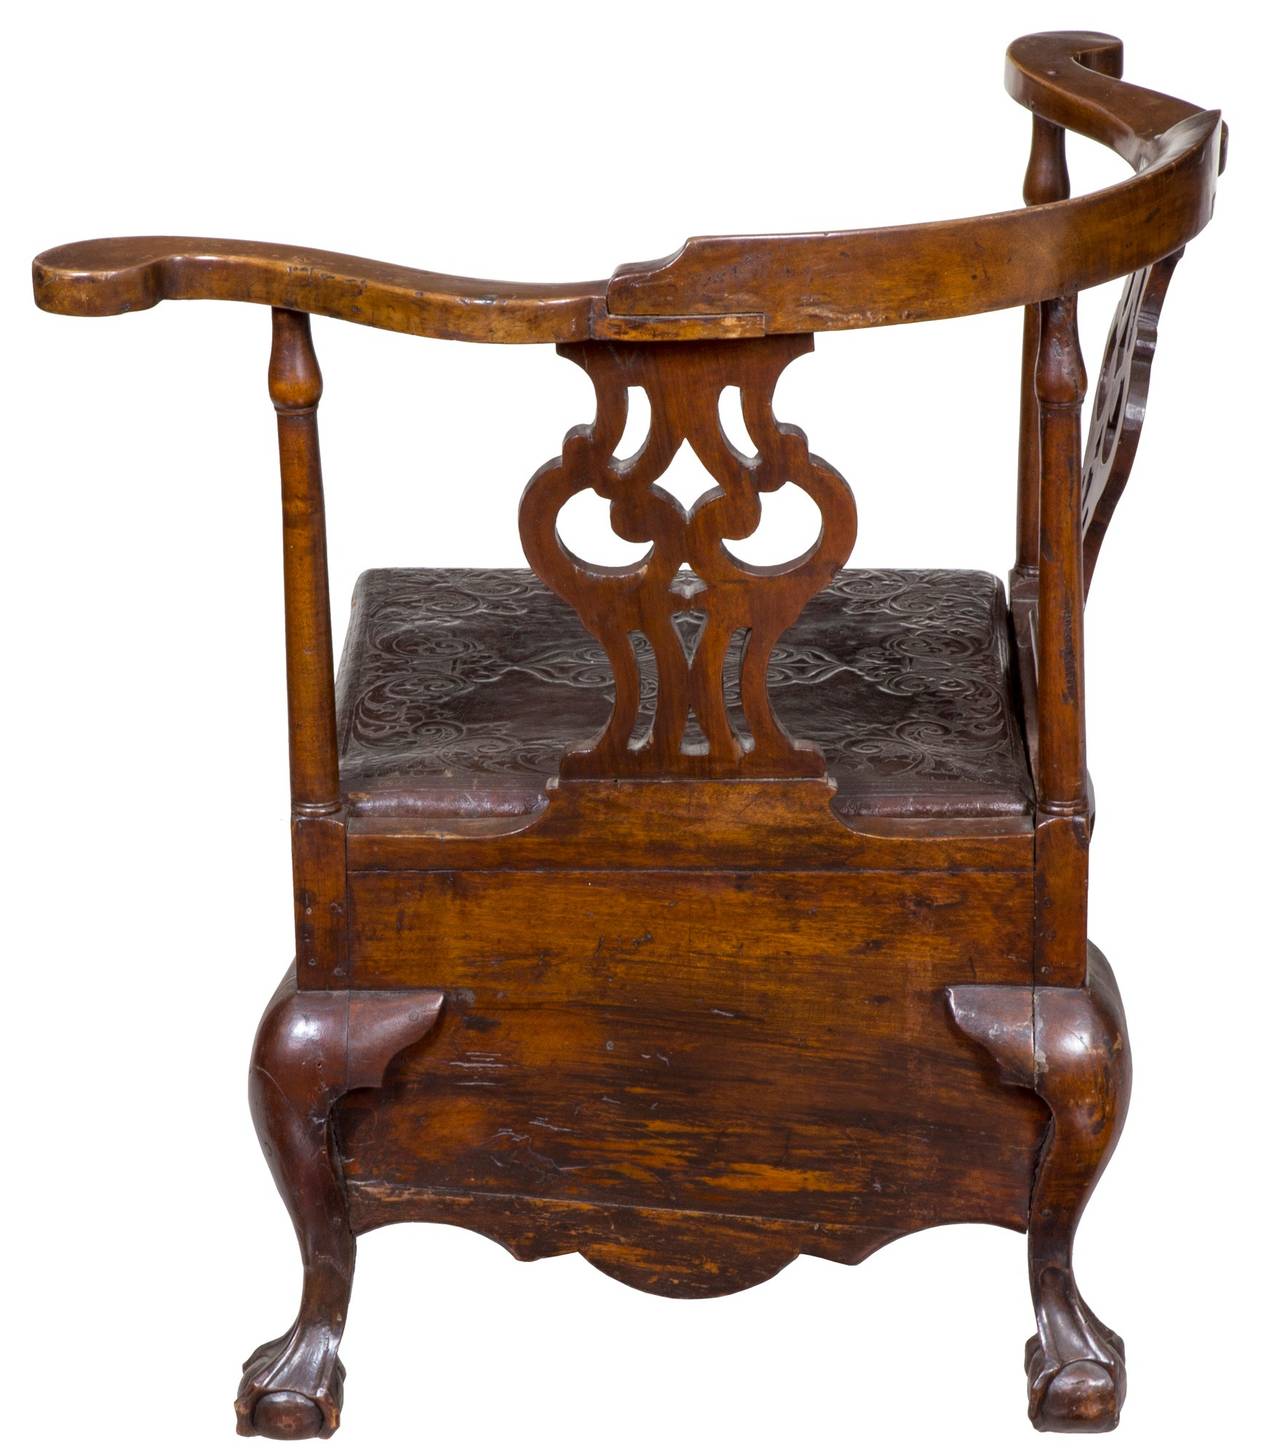 This commode stool, which would otherwise appear to be a corner chair, is quite low to be a corner chair and meant, through its deep skirt, to hold a potty insert, which is now gone. It retains its original embossed leather seat with rosehead nails,